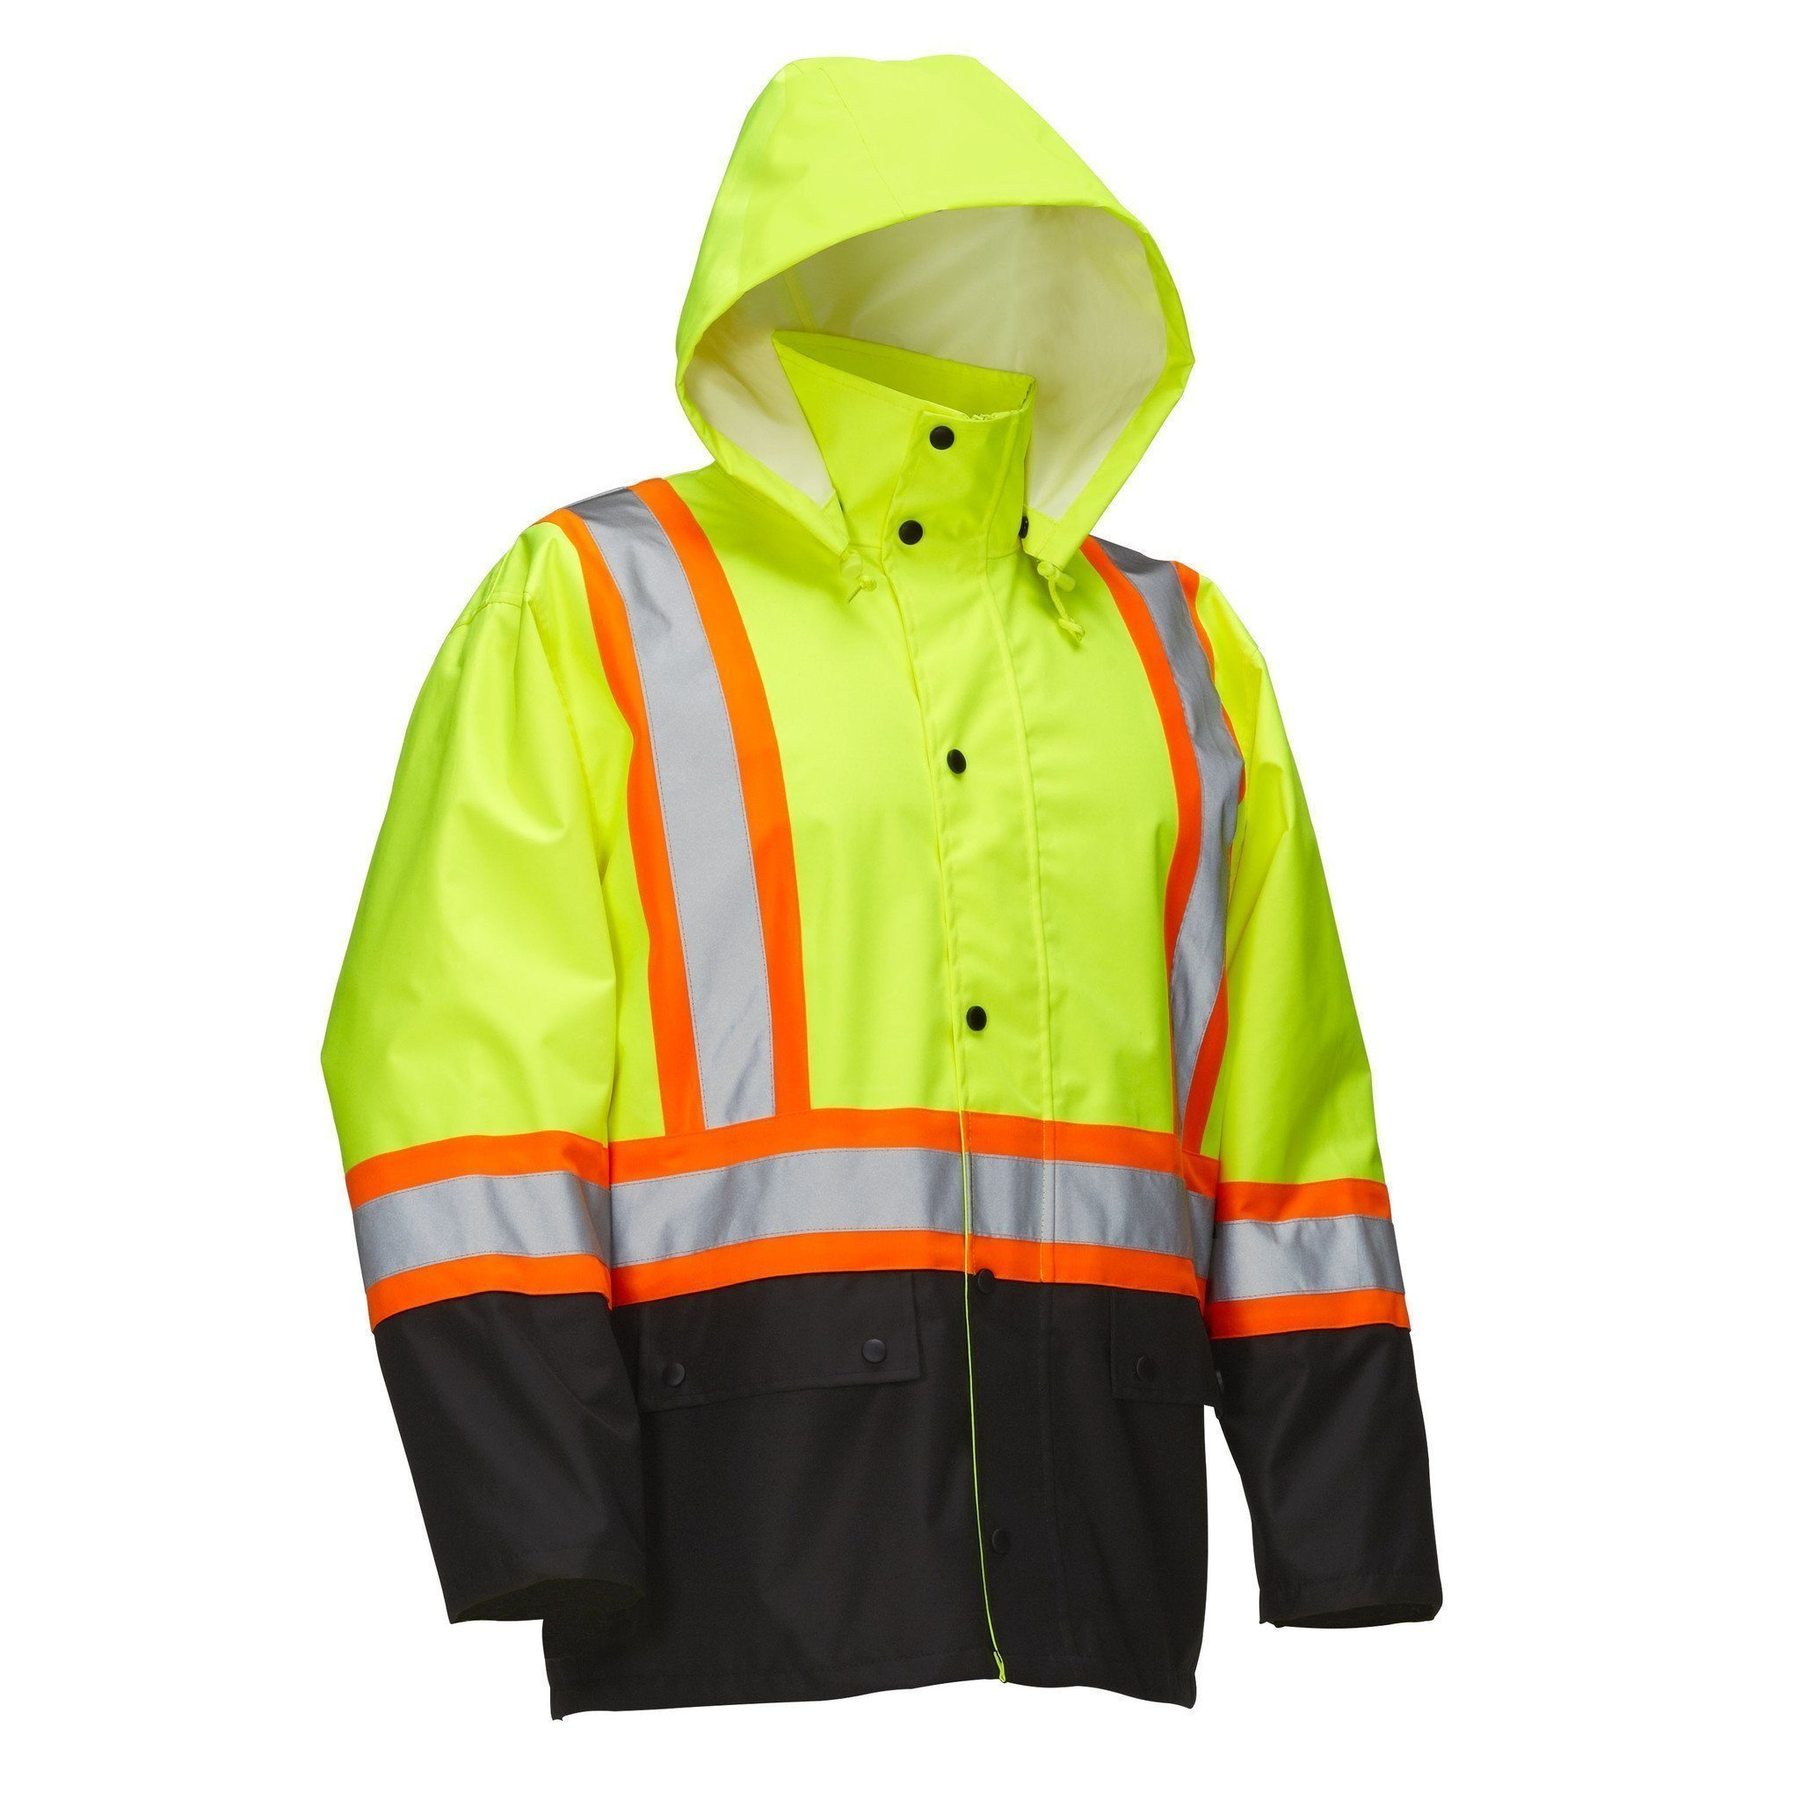 Forcefield Hi Vis Safety Rain Jacket with Snap-Off Hood - Rumors Safety ...